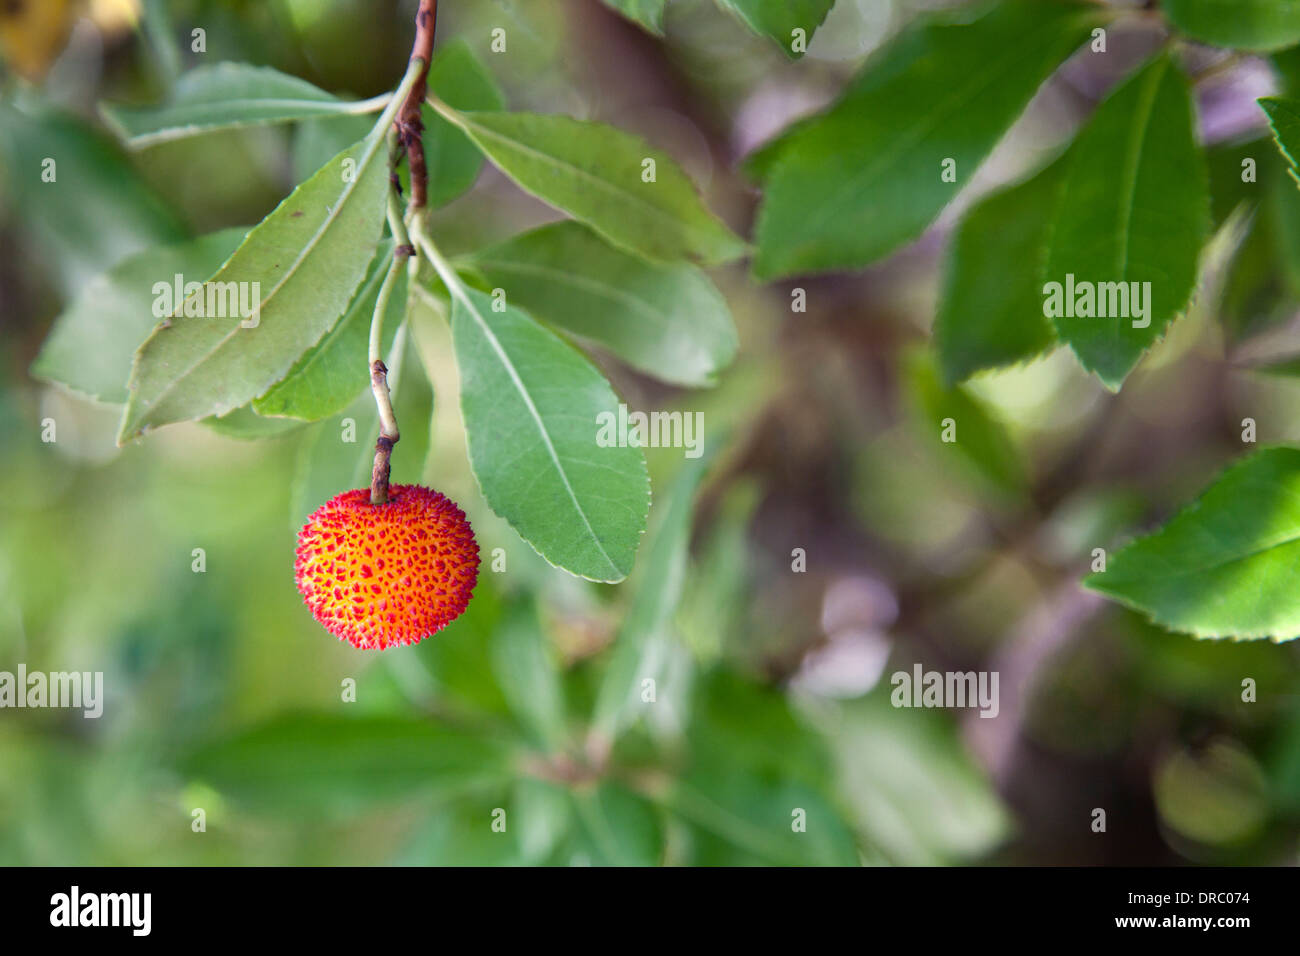 Ripe arbutus fruit (Madroño, Corbezzolo) maturing in the Straberry tree. Selective focus on fruits. Stock Photo